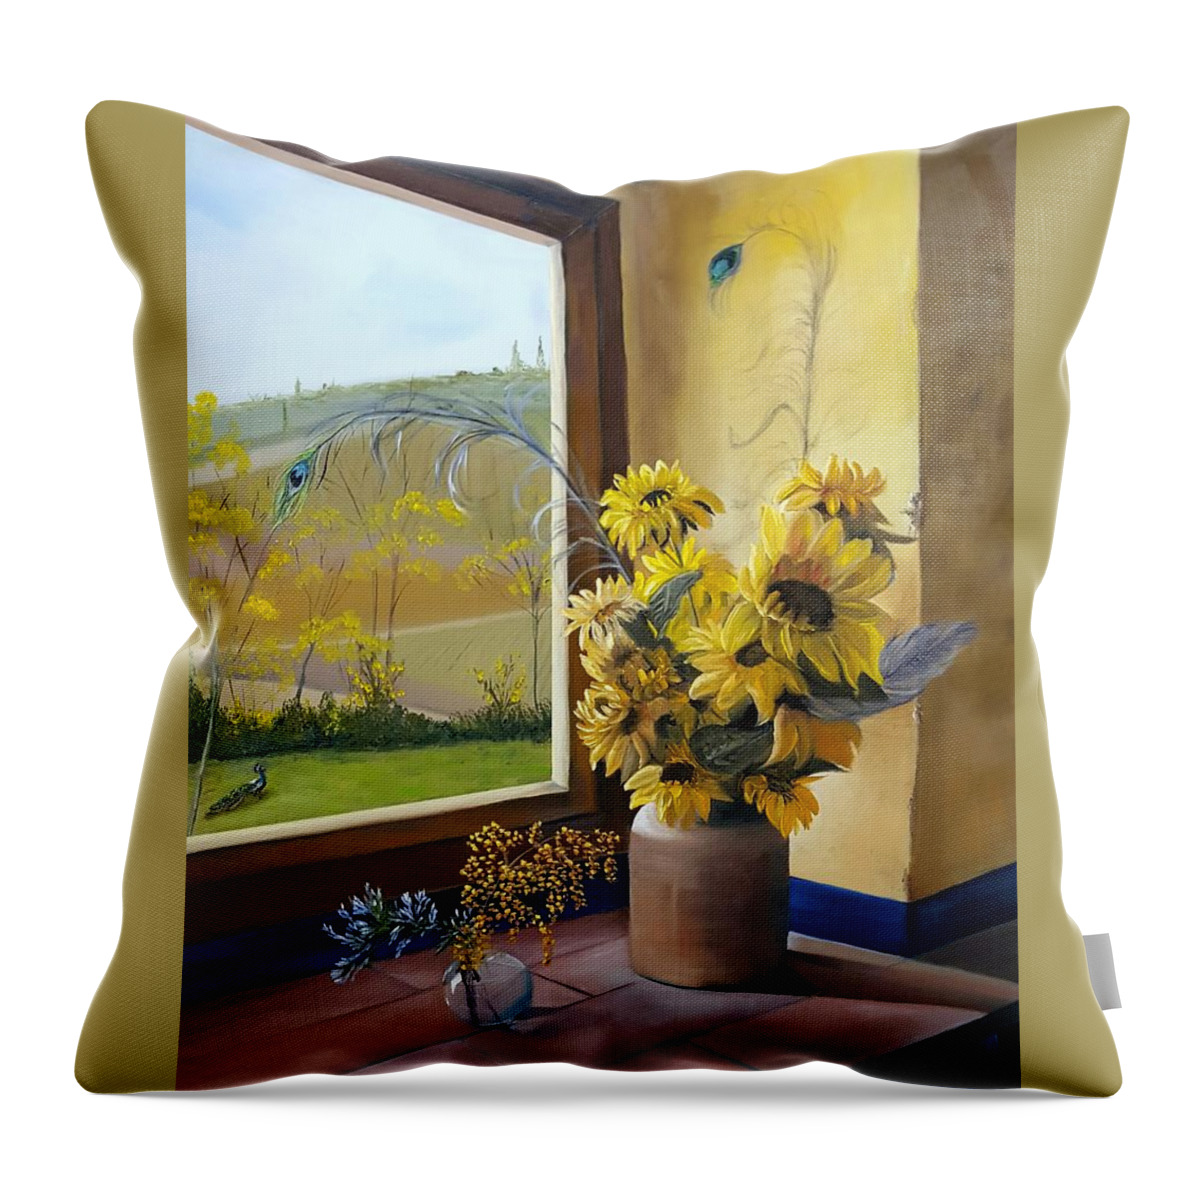 Tuscany Throw Pillow featuring the painting Tuscan Sunflowers by Connie Rish